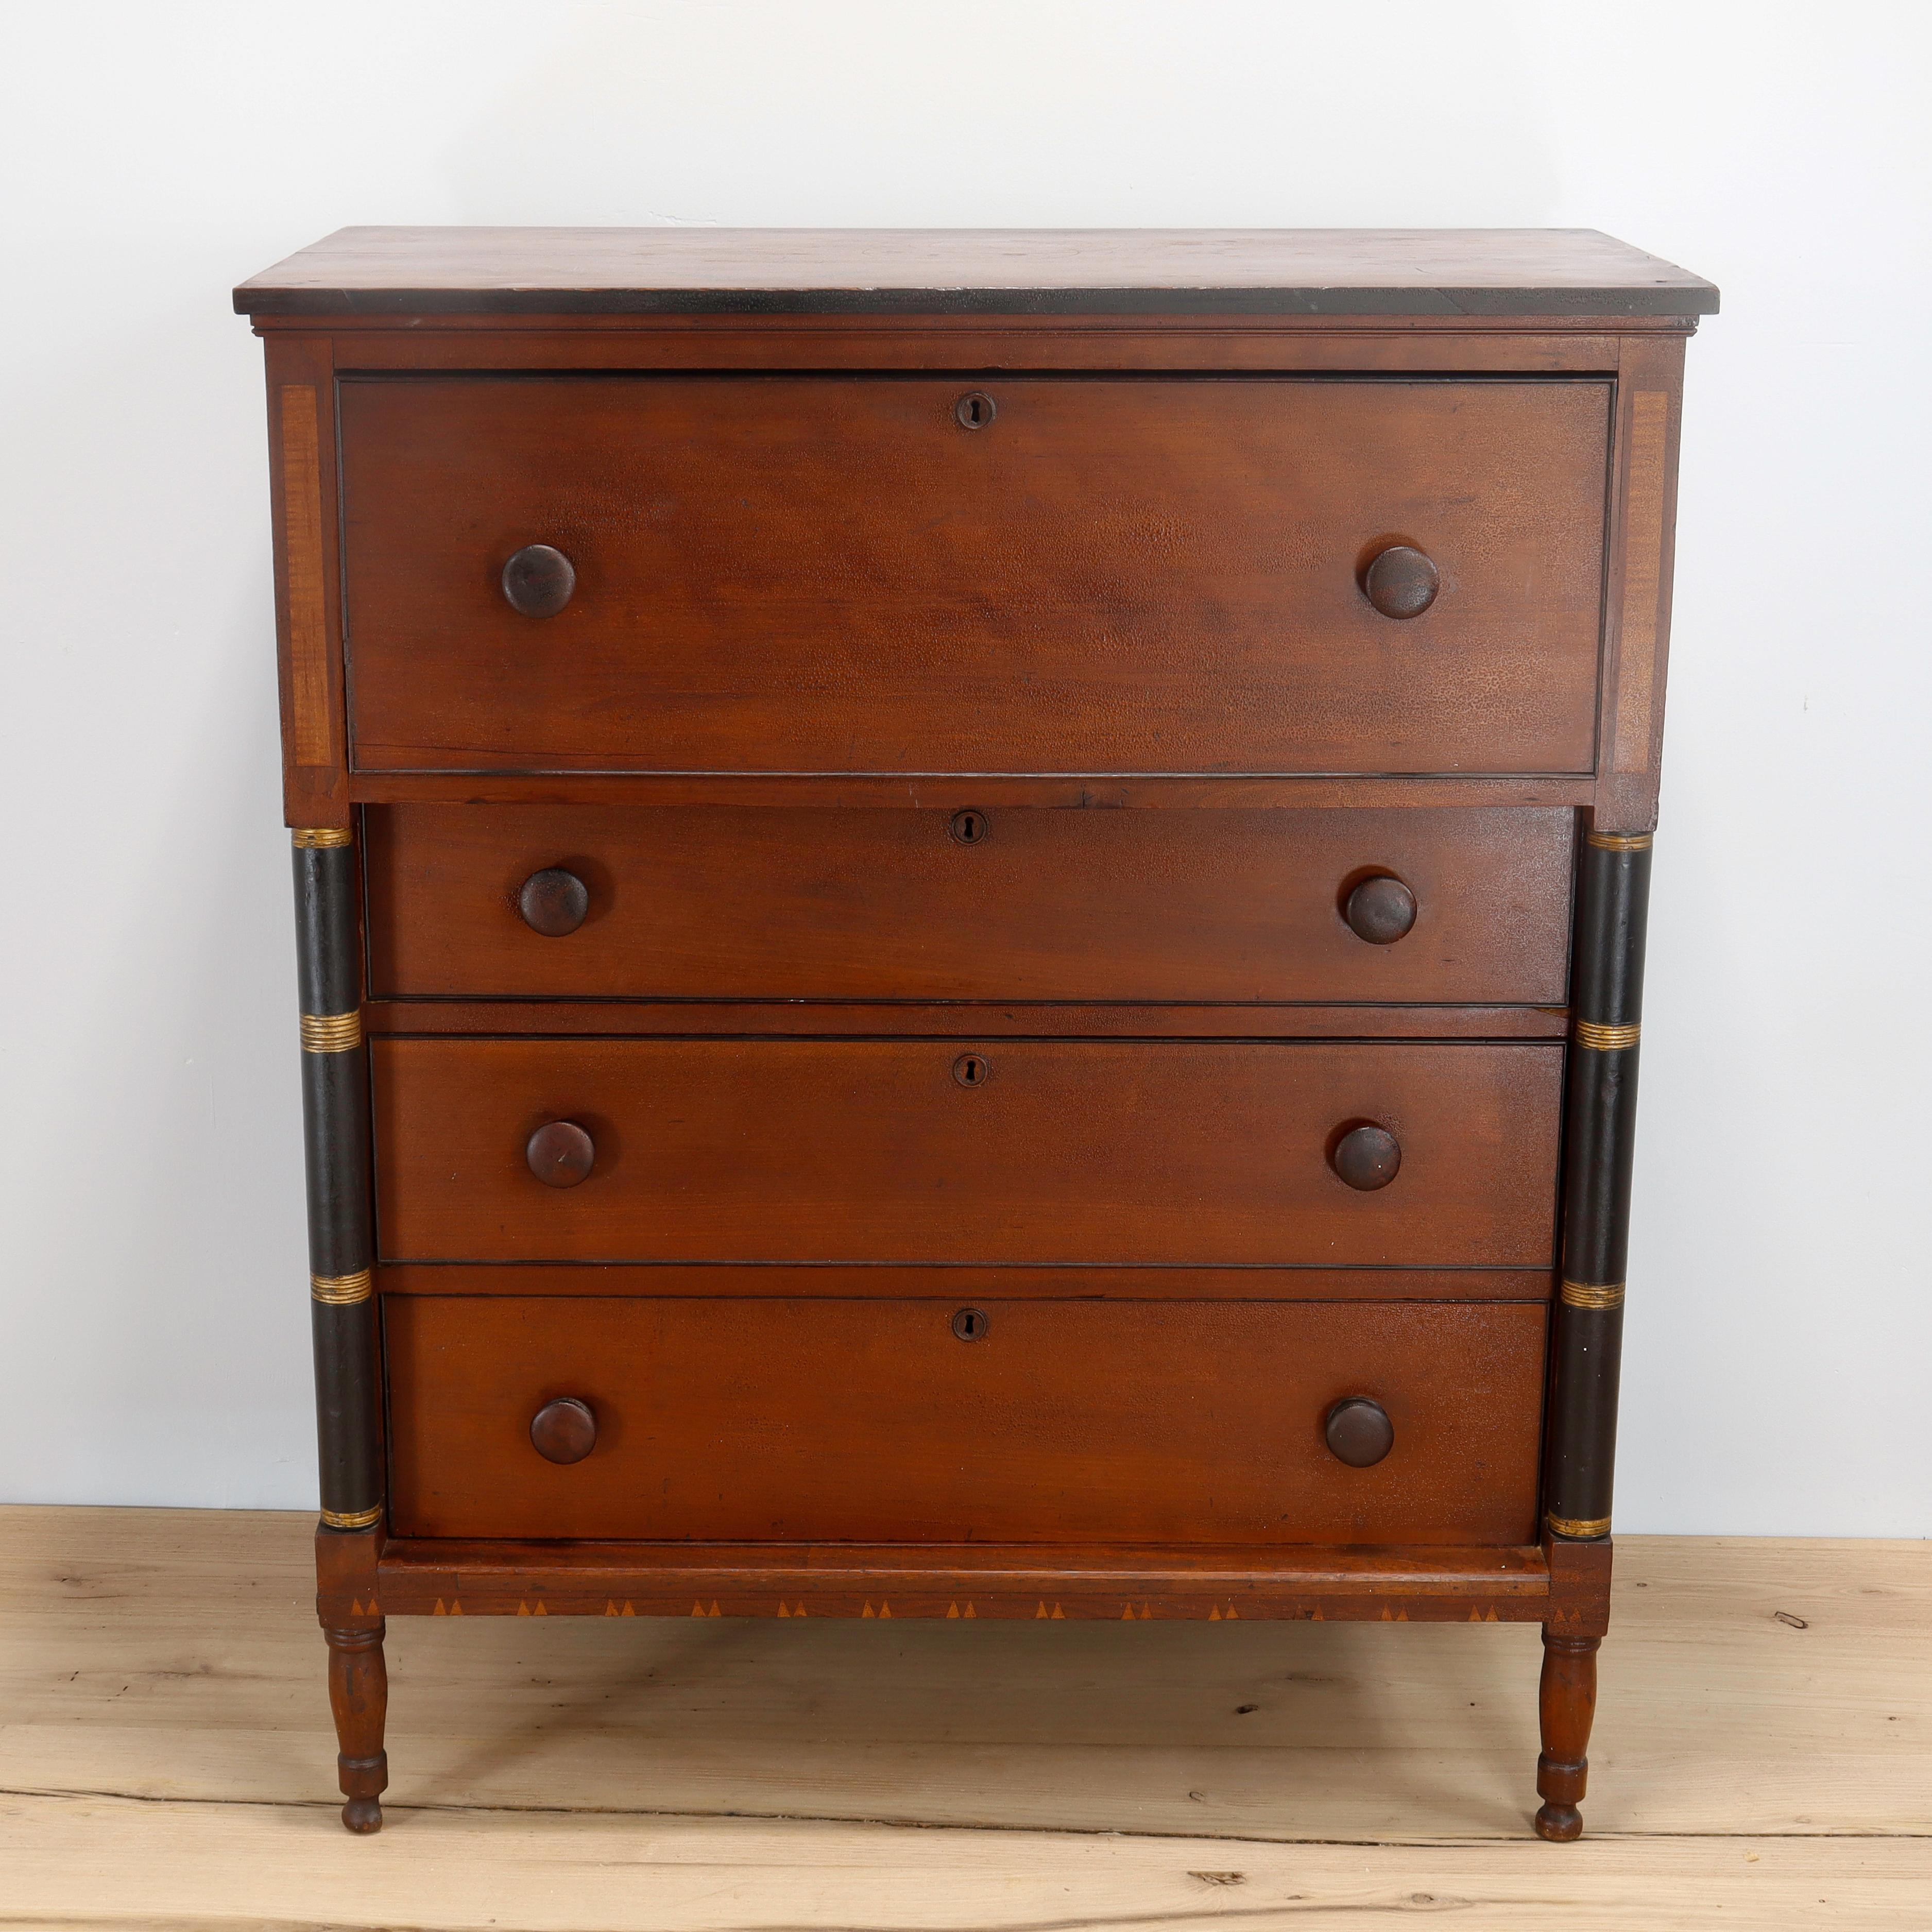 A fine antique wooden chest of drawers.

With a terrific old finish.

In cherry wood with a polar secondary, turned wooden pulls, and round wooden escutcheons. 

Painted with black highlights to edge and with black & gold paint to turned side